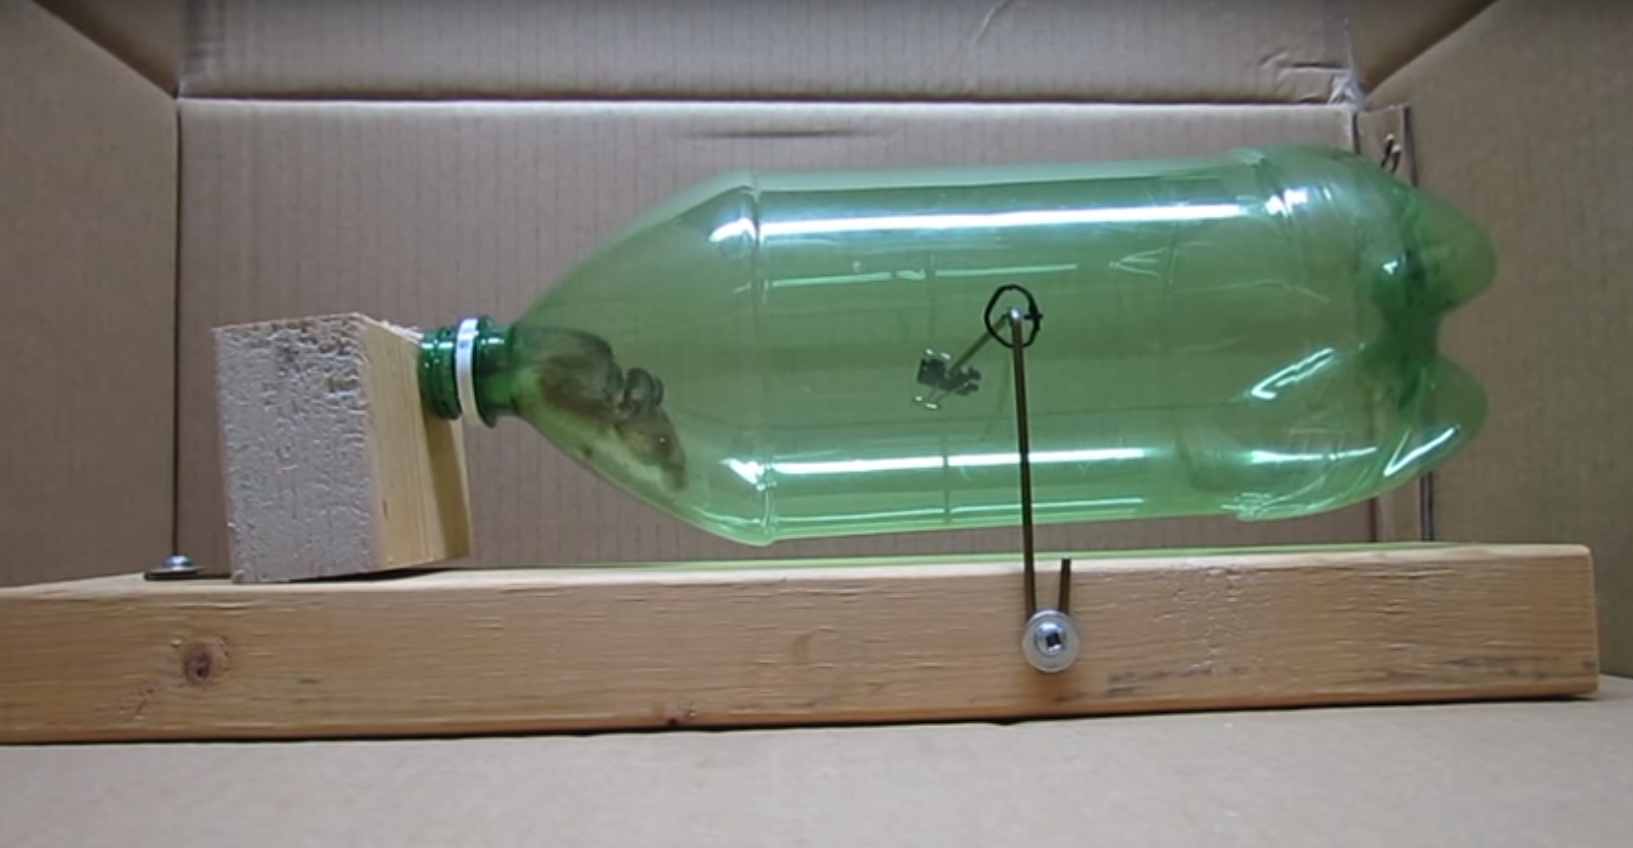 The bait trap, made of a PET bottle, used to collect the harvest mouse